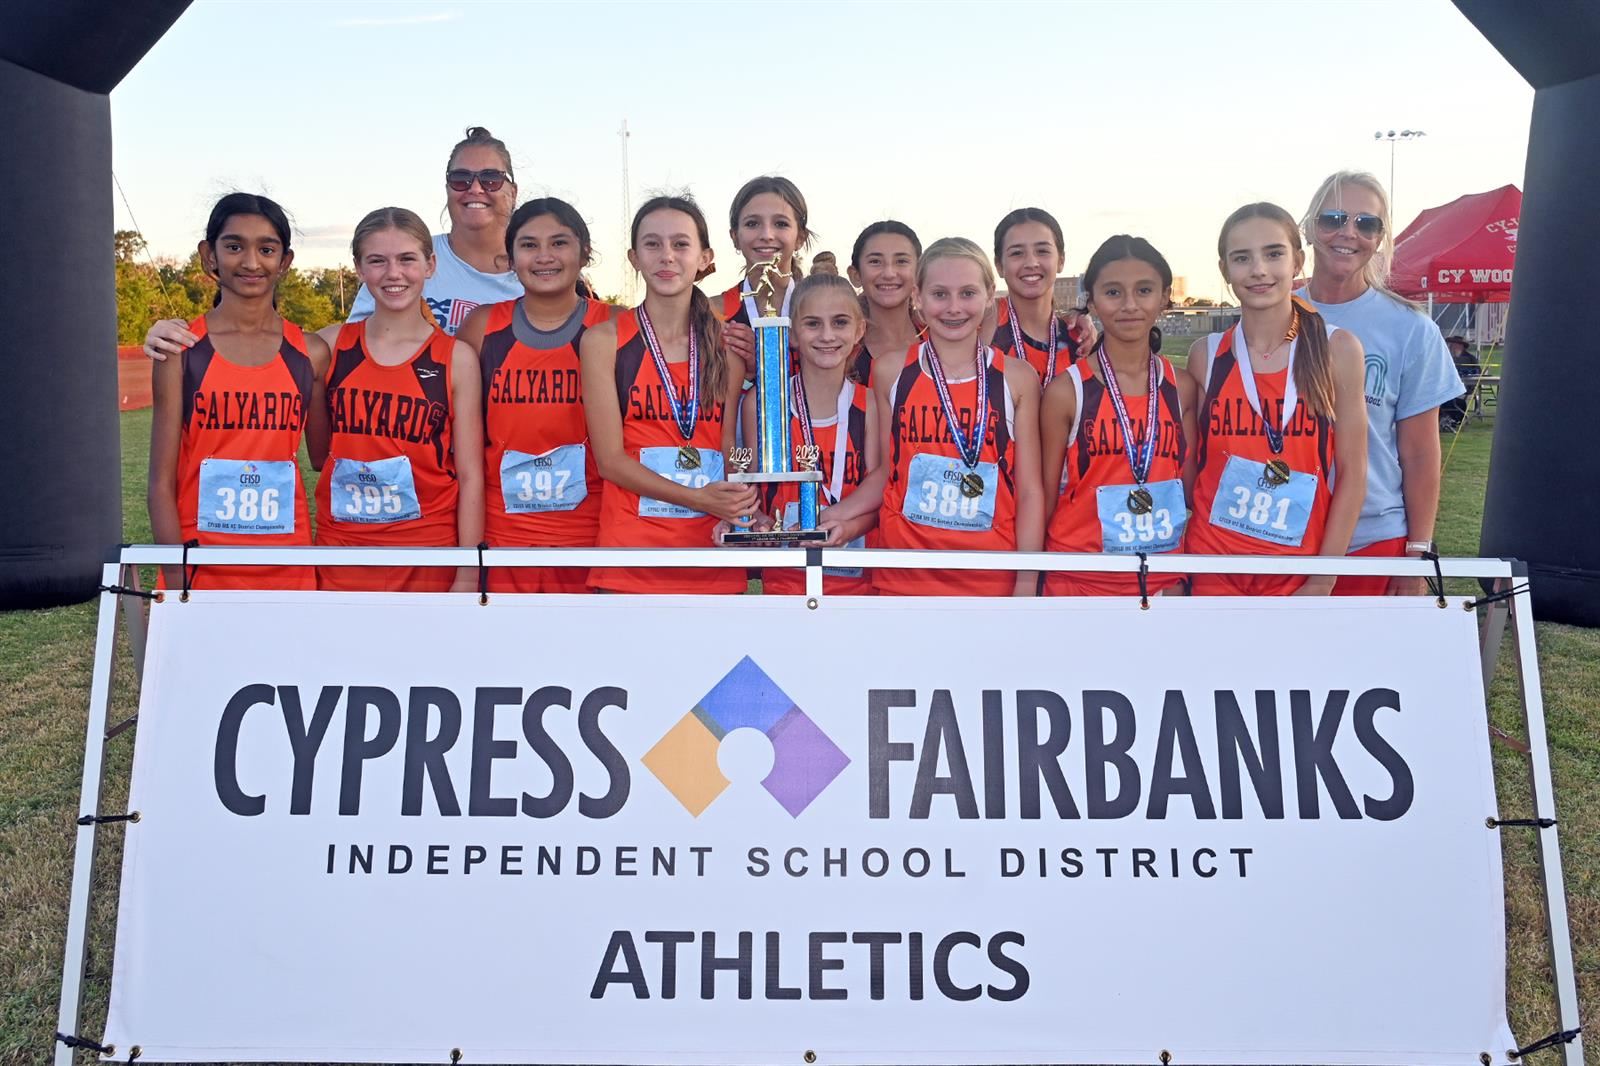 Salyards Middle School won the seventh grade girls’ cross country team championships with a score of 33 points on Oct. 18.